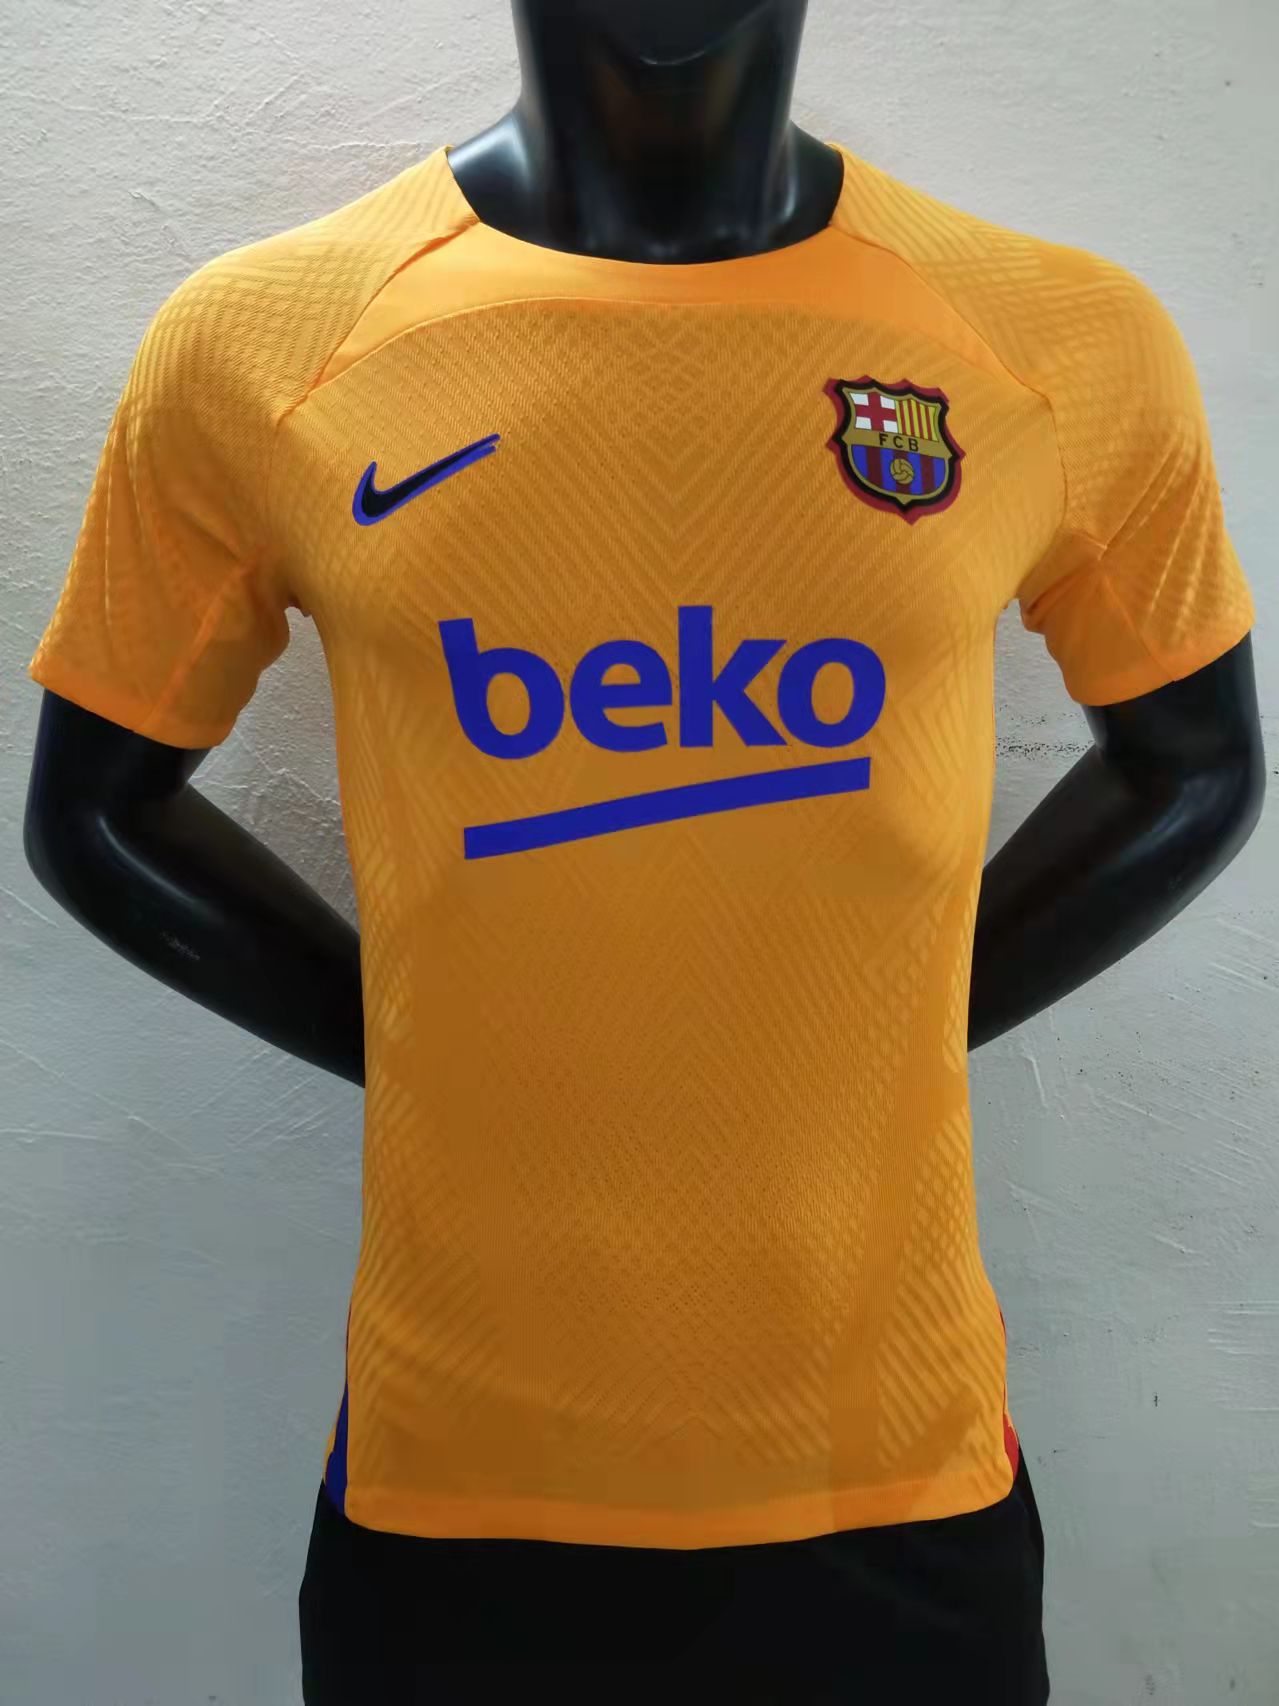 2022/23 soccer jersey top quality - Click Image to Close